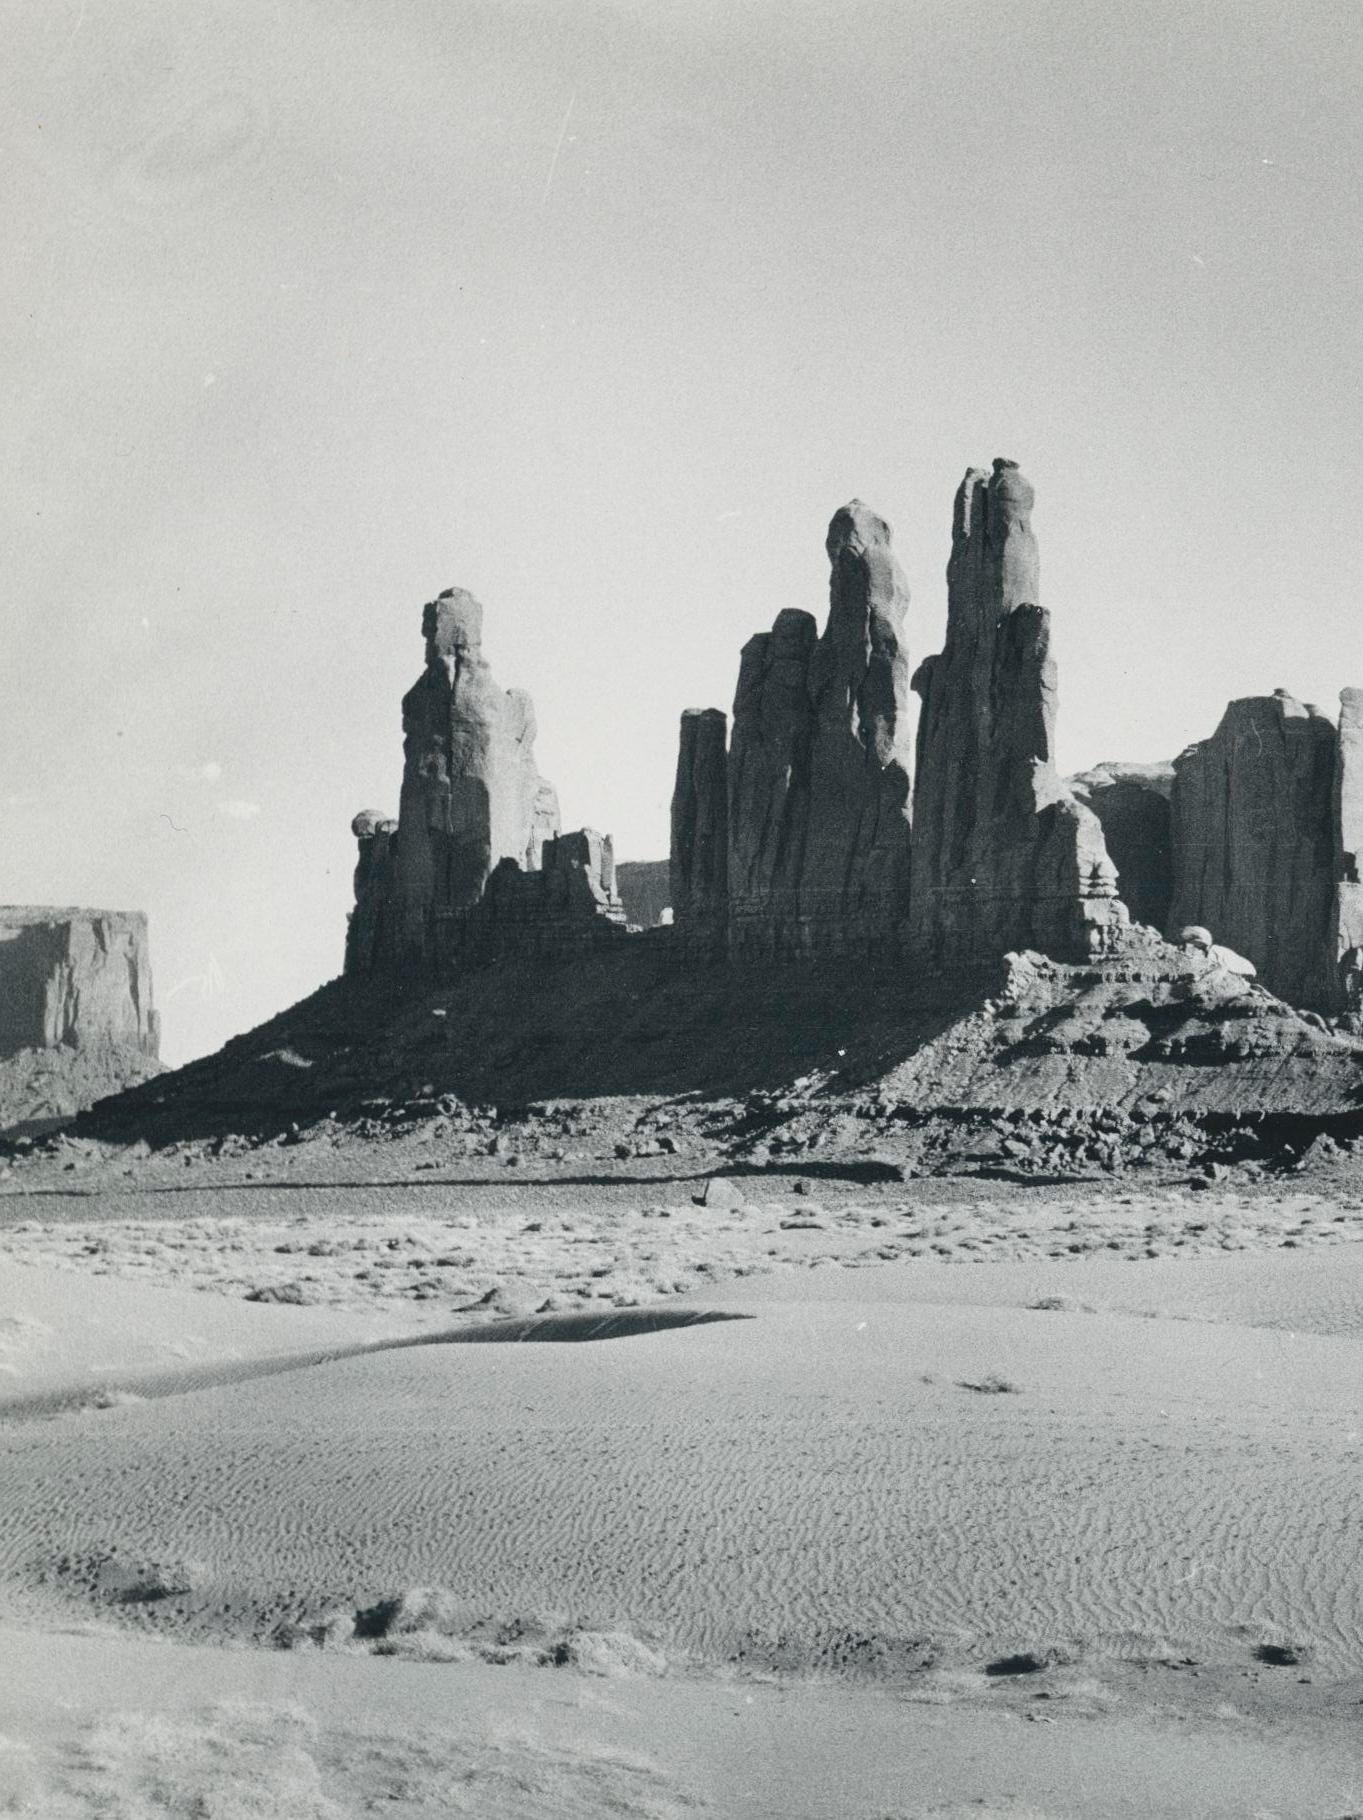 Monument Valley, Utah/Arizona, Black and White, USA 1960s, 16.7 x 23, 4 cm - Photograph by Erich Andres